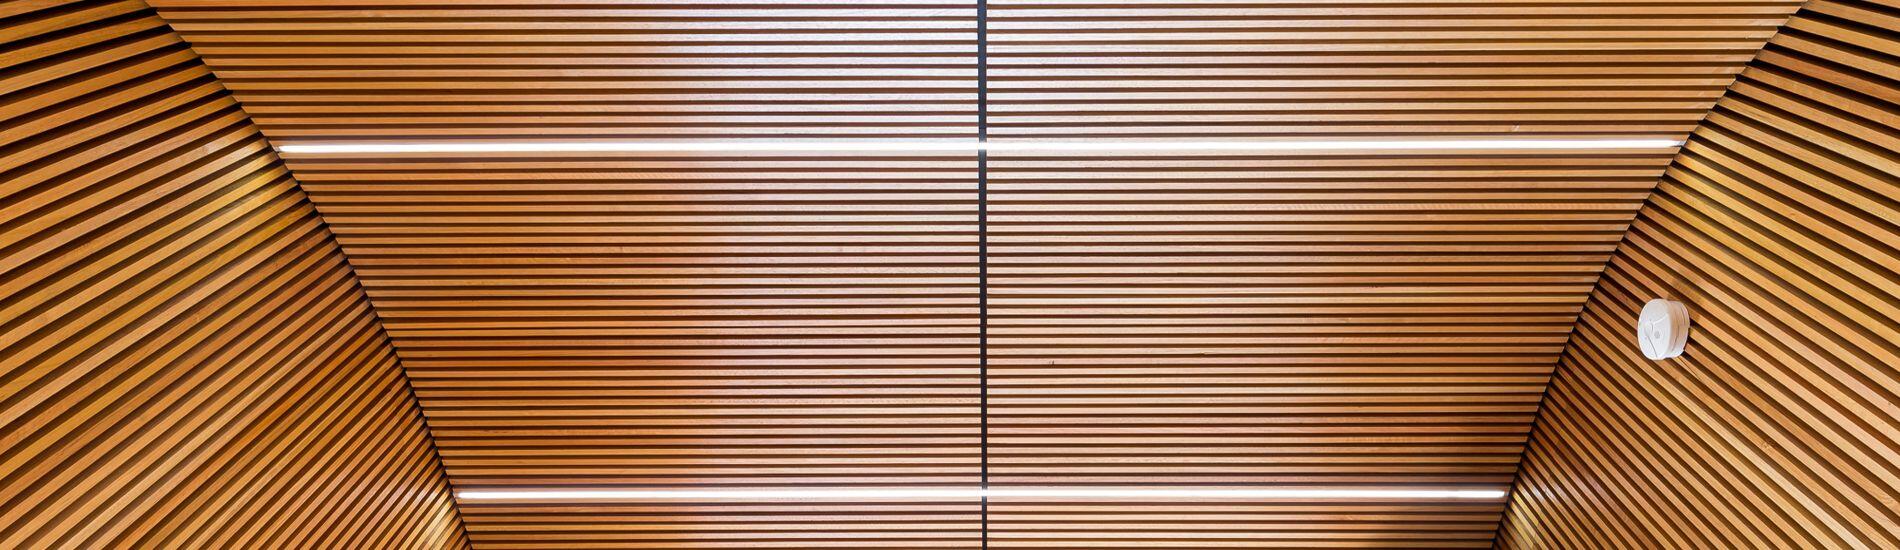 Dramatic SUPASLAT Slatted Wall and Curved Ceiling Panels Transform Entry in Building Refurbishment